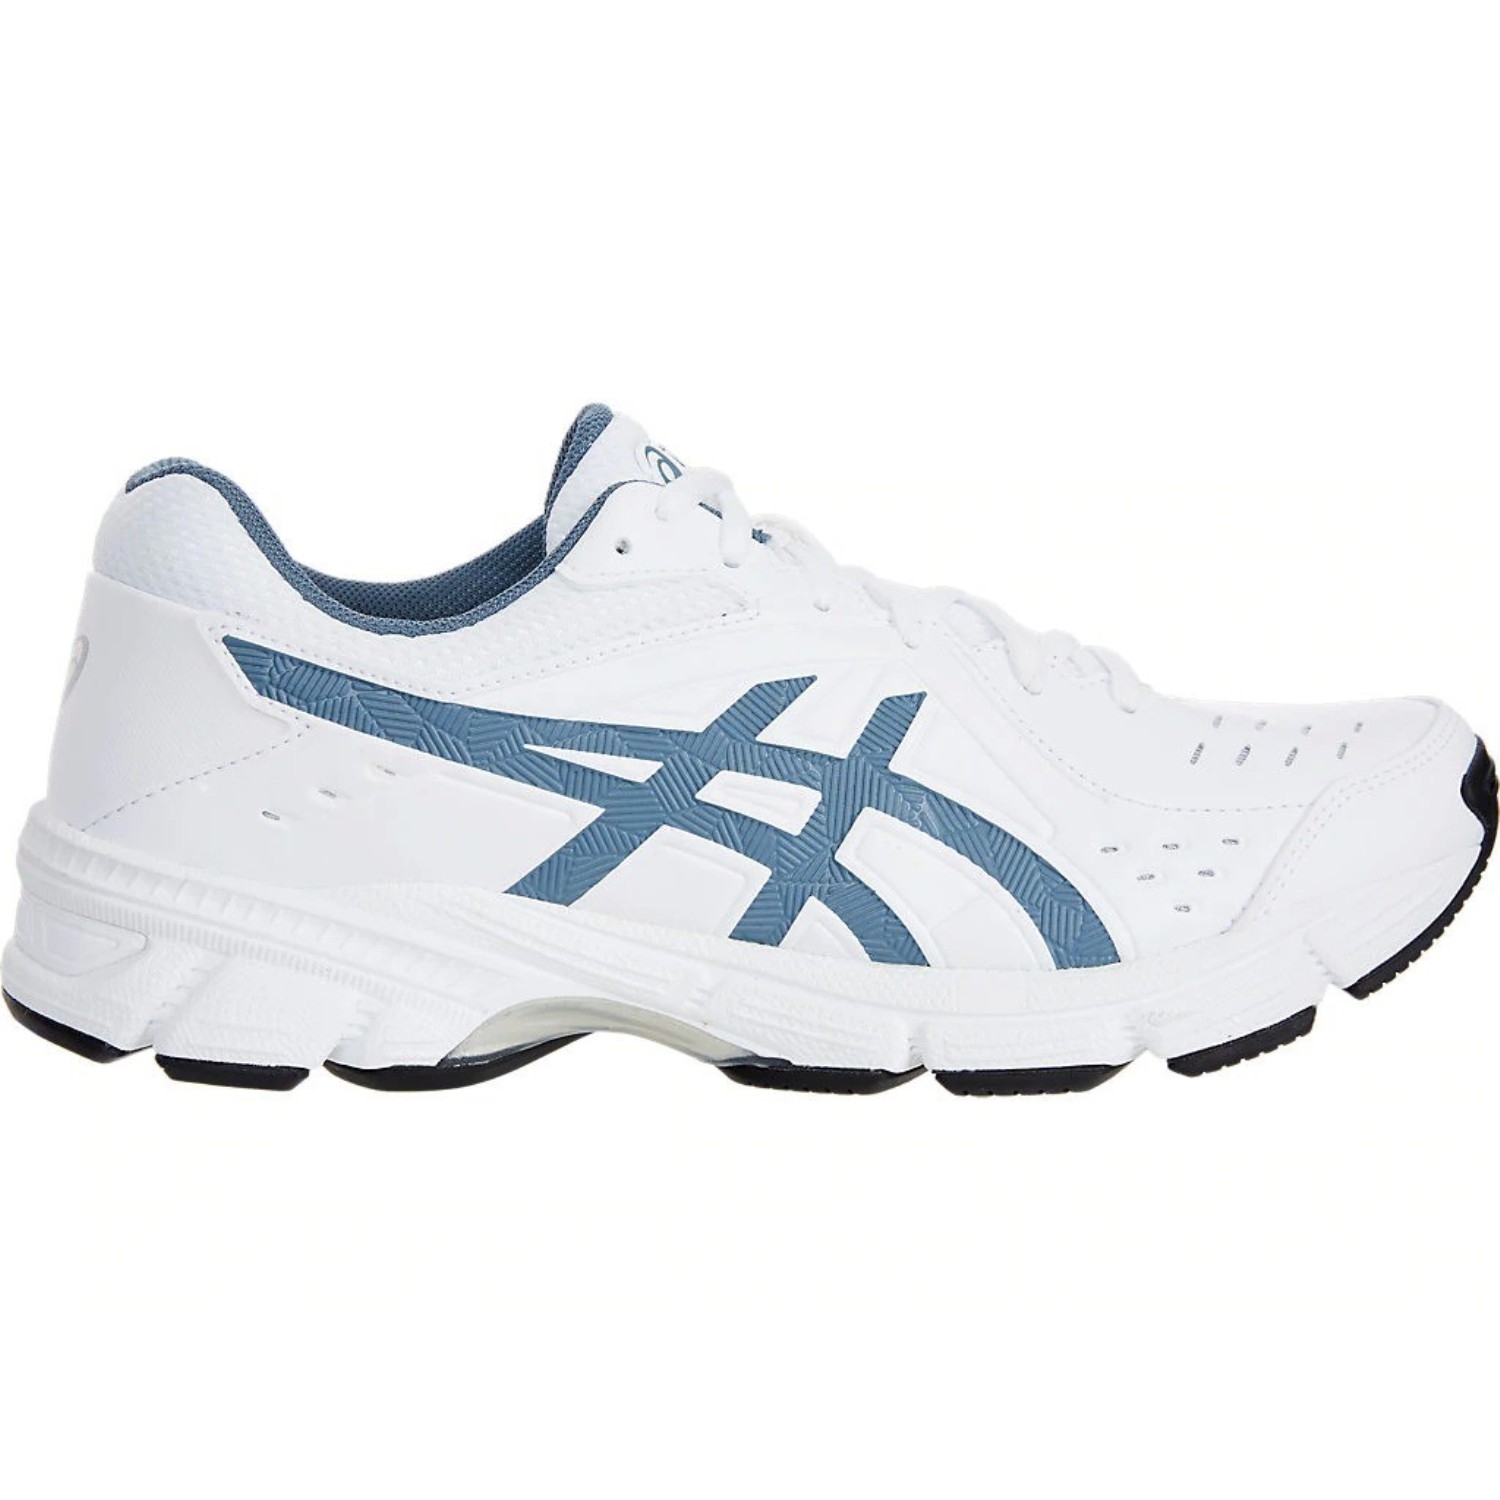 mens wide cross training shoes